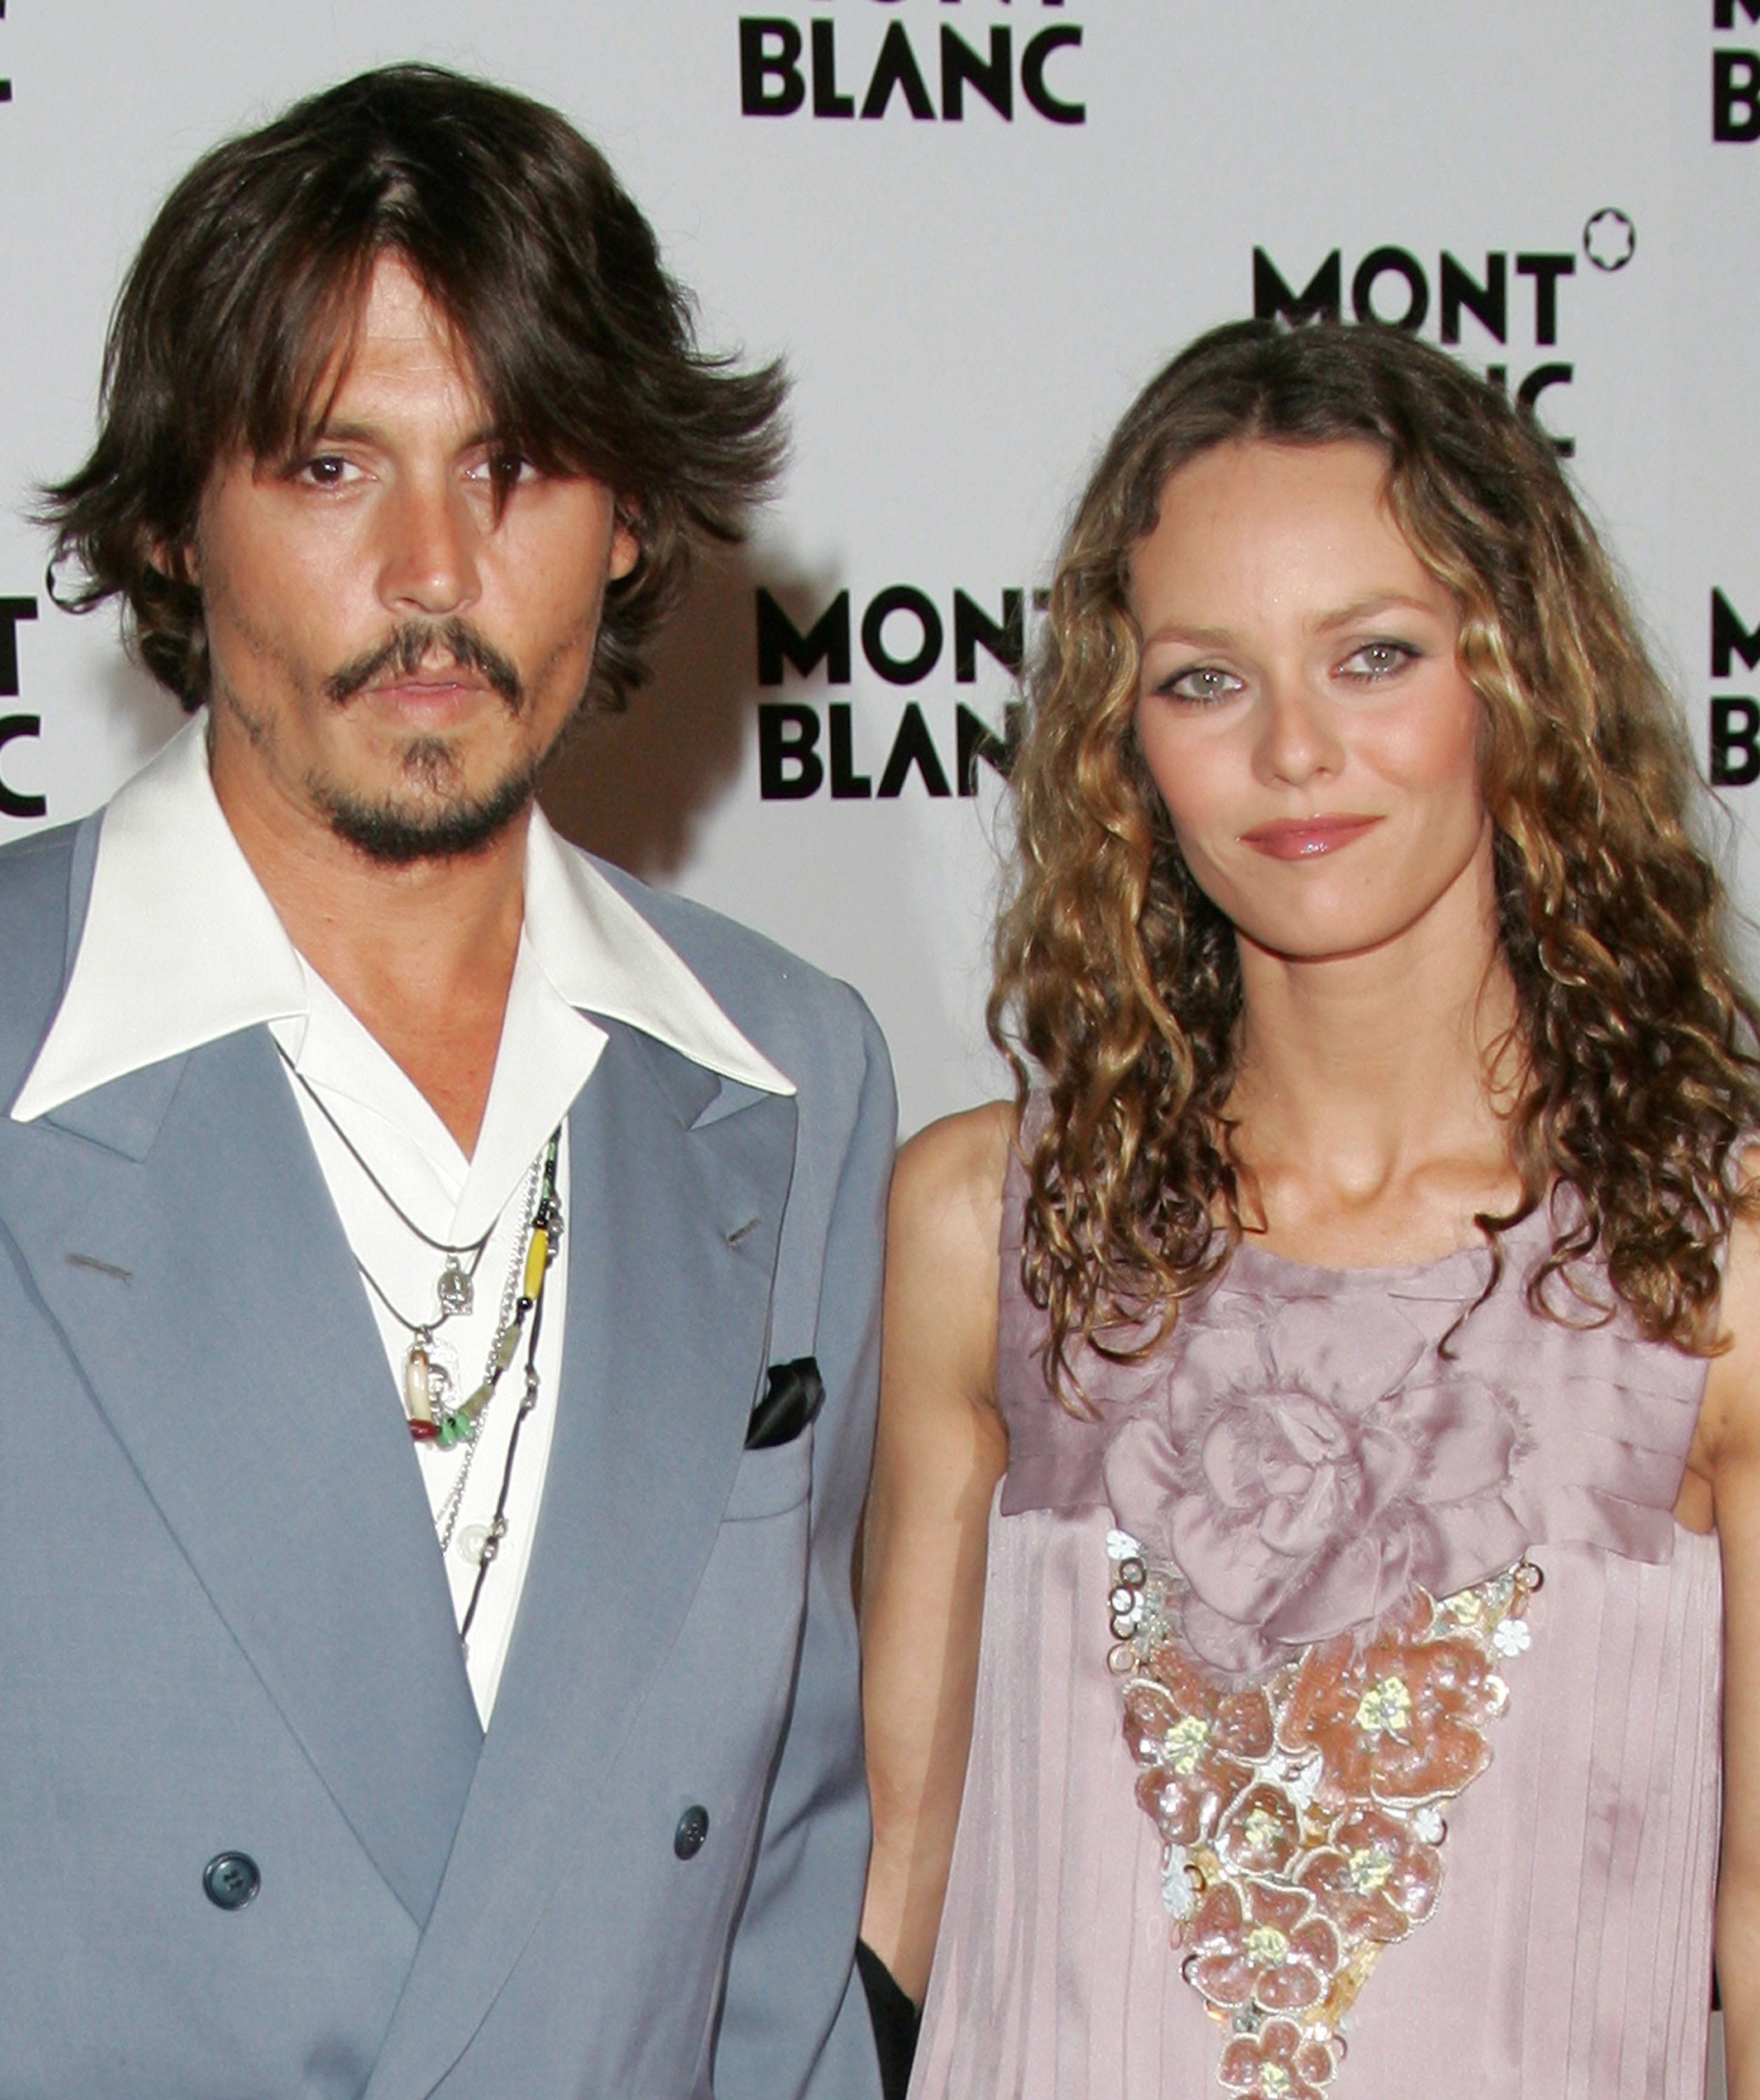 Johnny Depp and Vanessa Paradis at the "Mont Blanc" 100th Anniversary Party on April 5, 2006. | Source: Getty Images